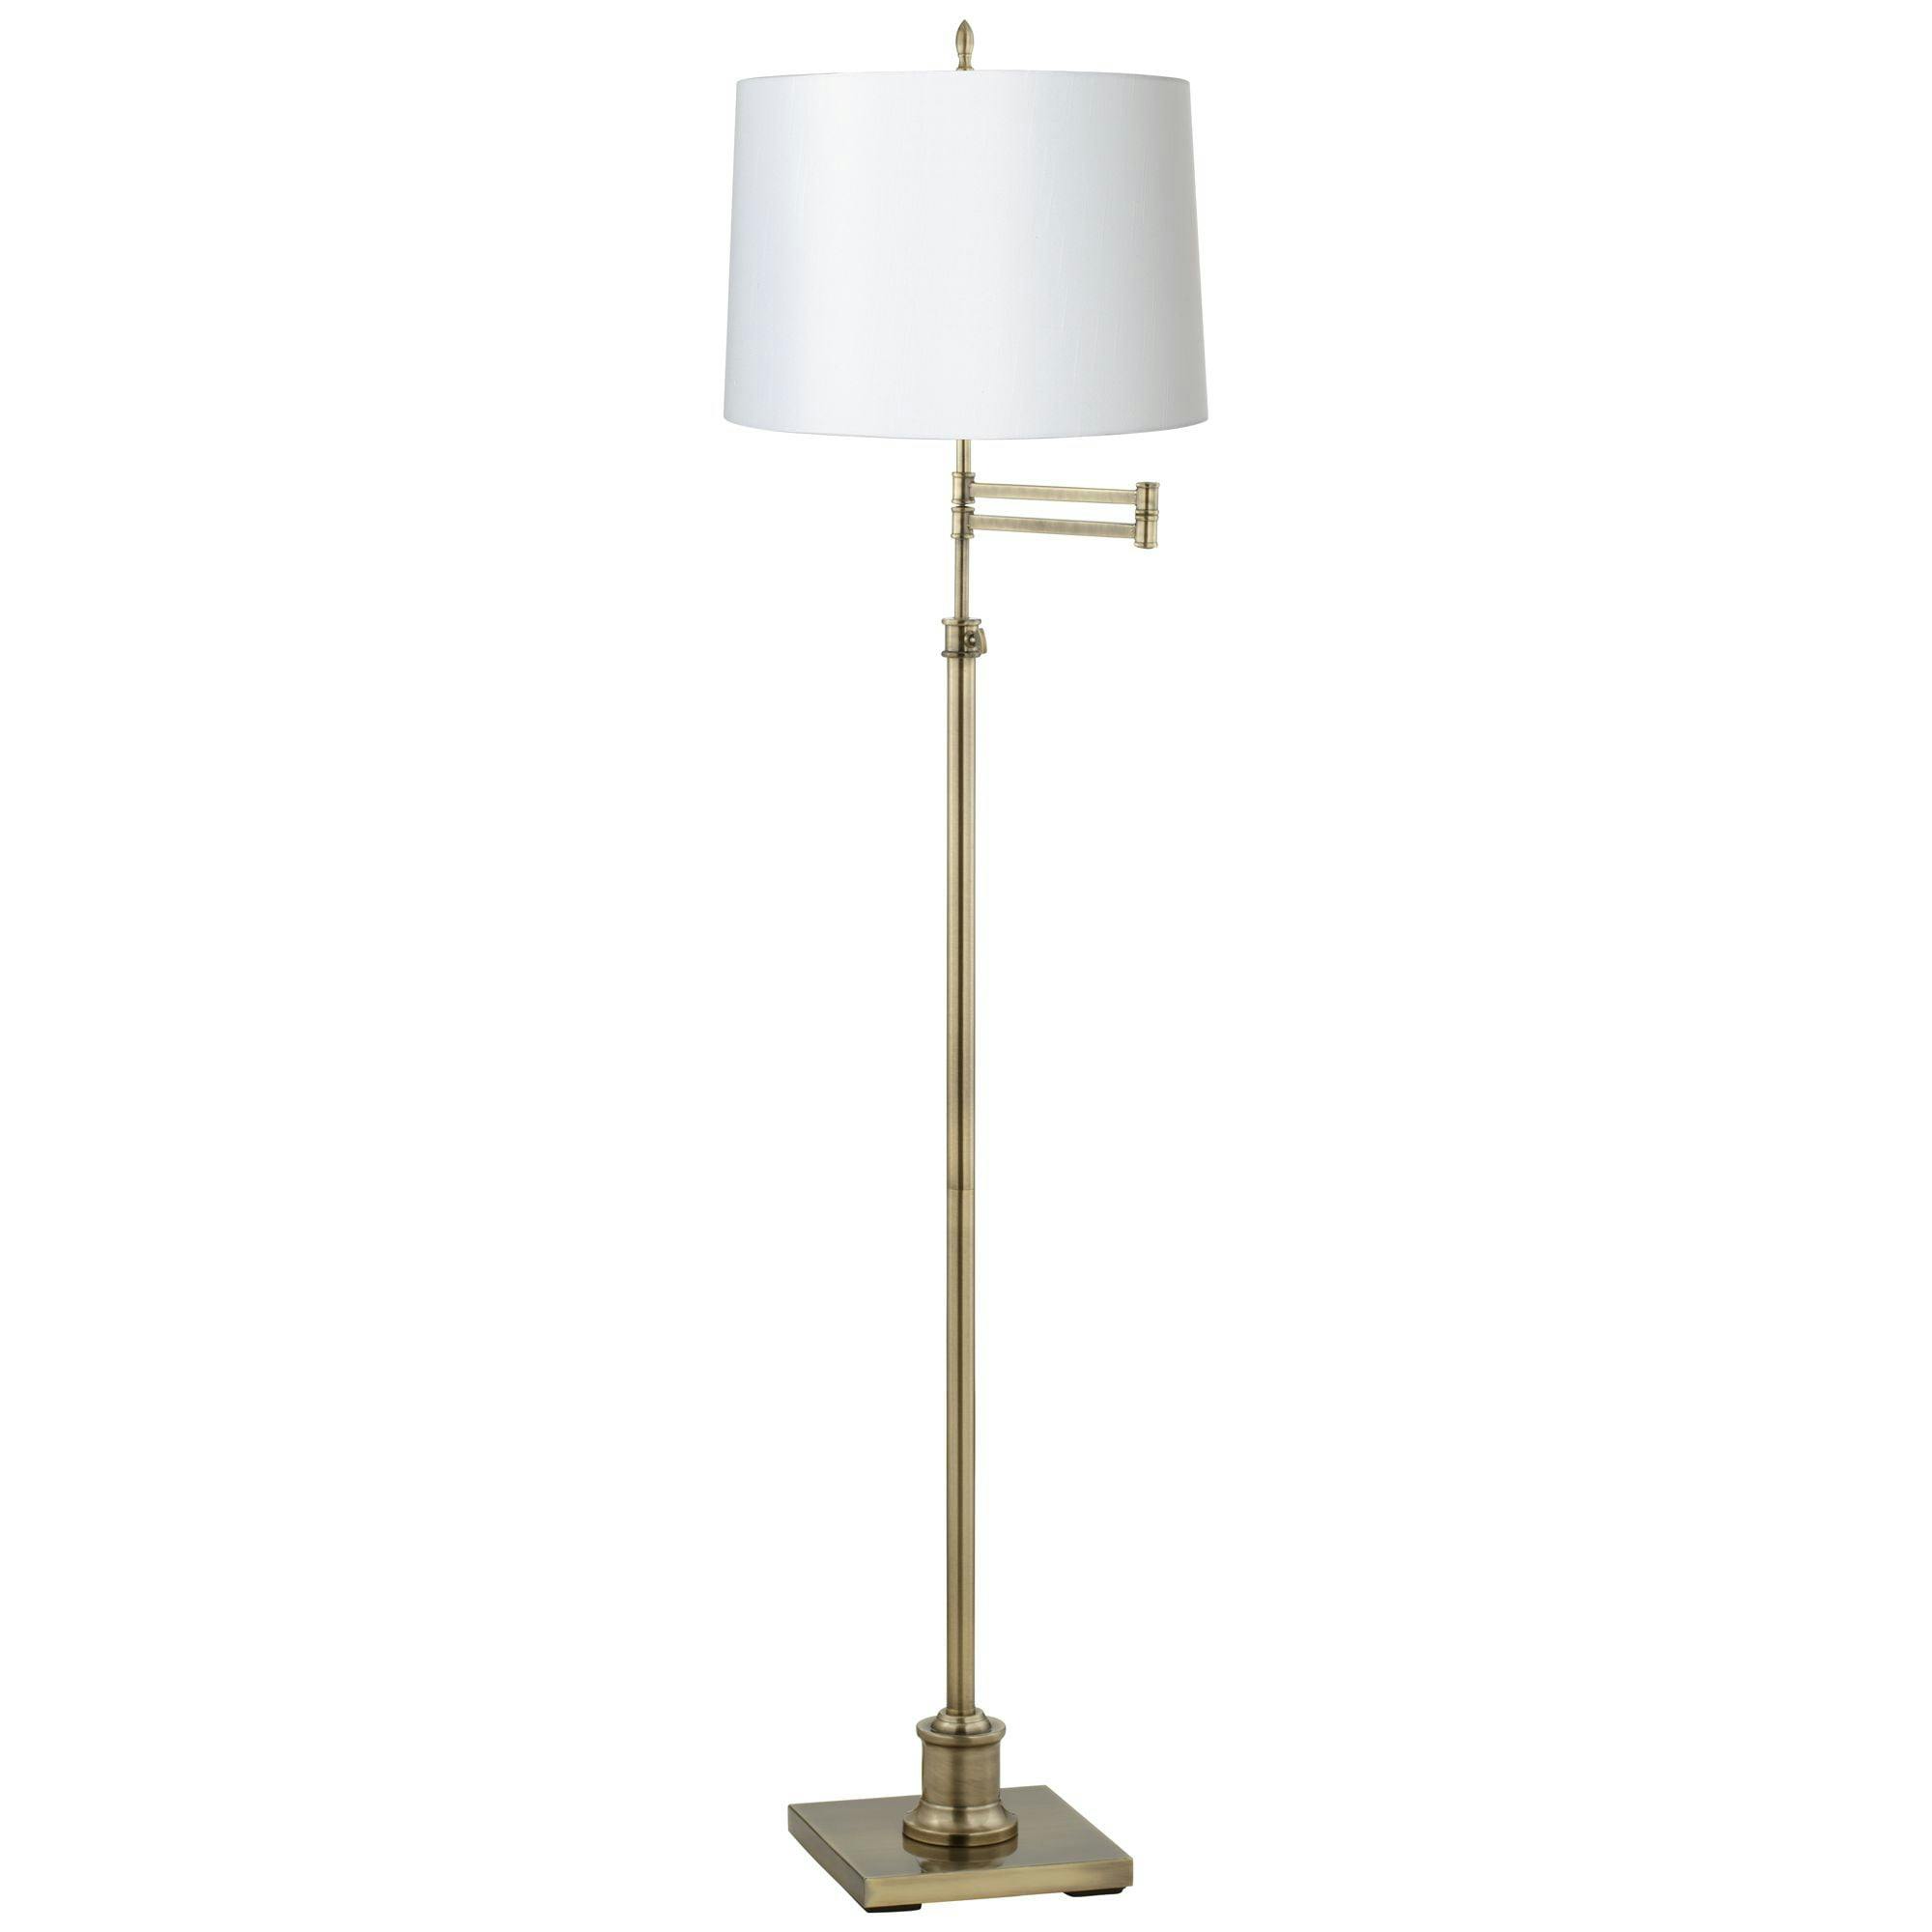 Adjustable Antique Brass Swing Arm Floor Lamp with White Drum Shade